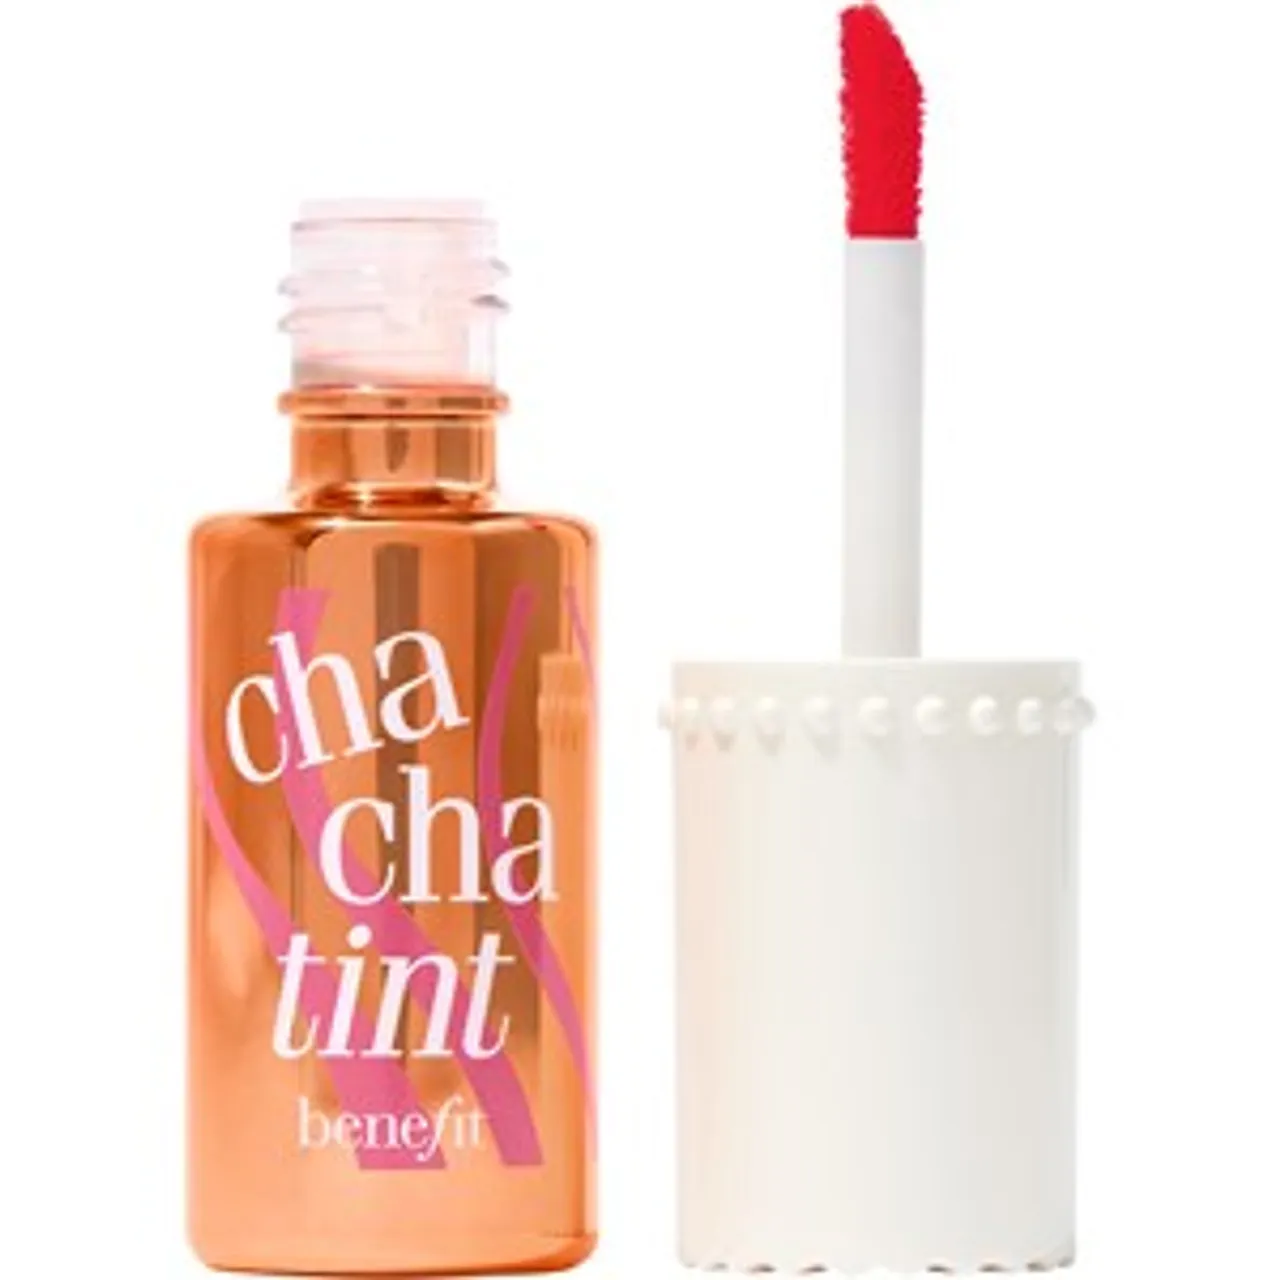 Benefit ChaChatint Female 6 ml